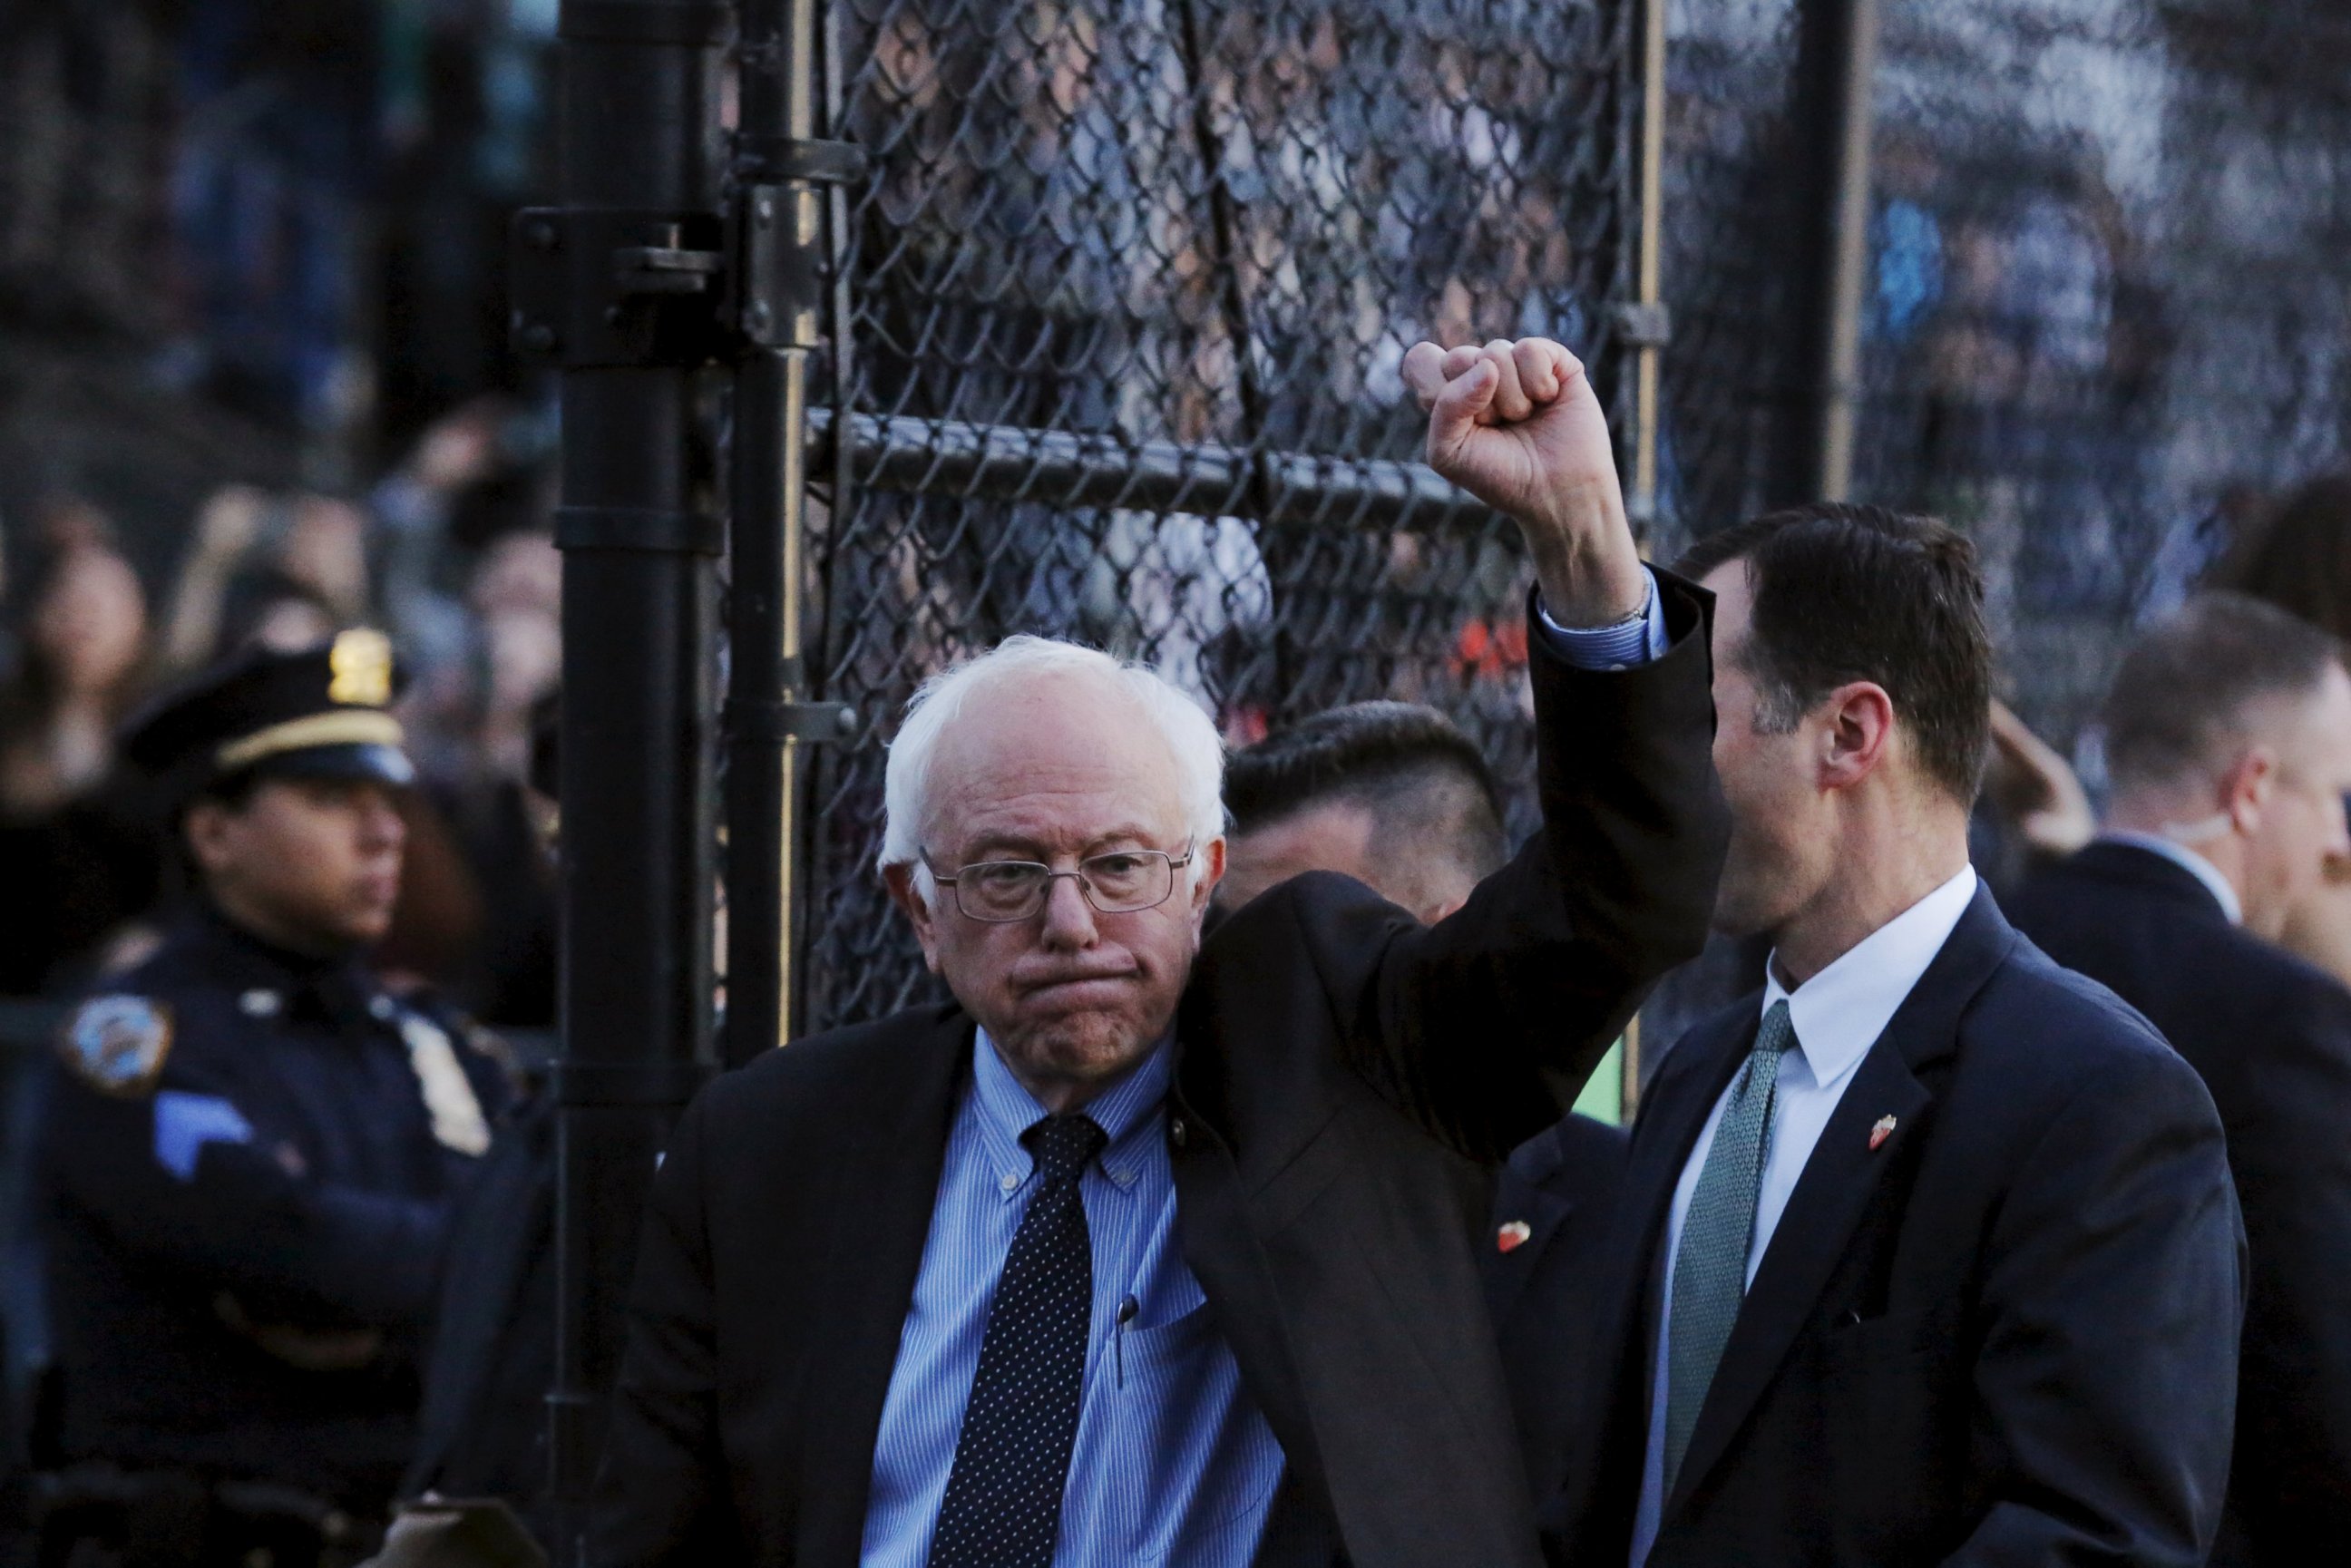 PHOTO: Democratic presidential candidate Bernie Sanders reacts to the crowd after speaking to an overflow crowd at a campaign rally at St Mary's Park in Bronx, New York, March 31, 2016. 